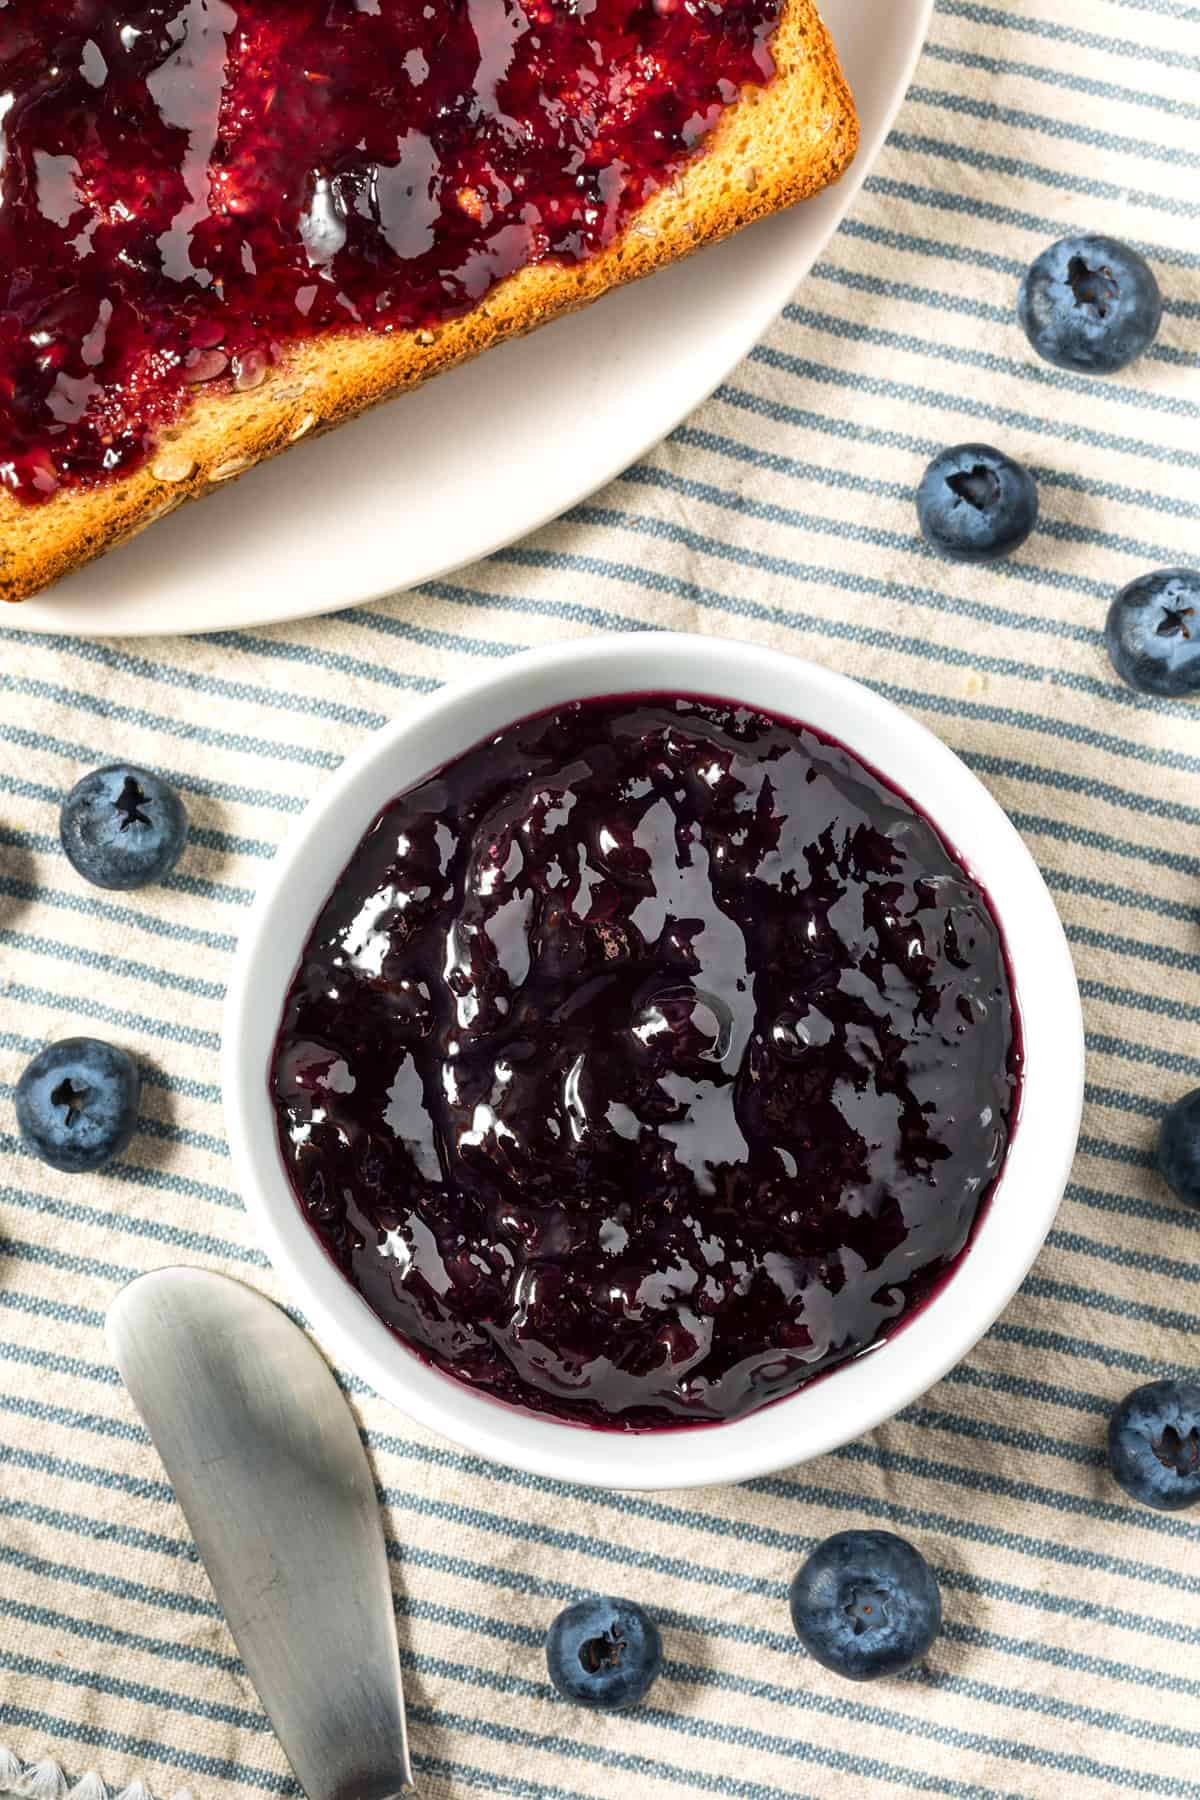 blueberry jam recipe without pectin homemade how to make canning preserving water bath freezer